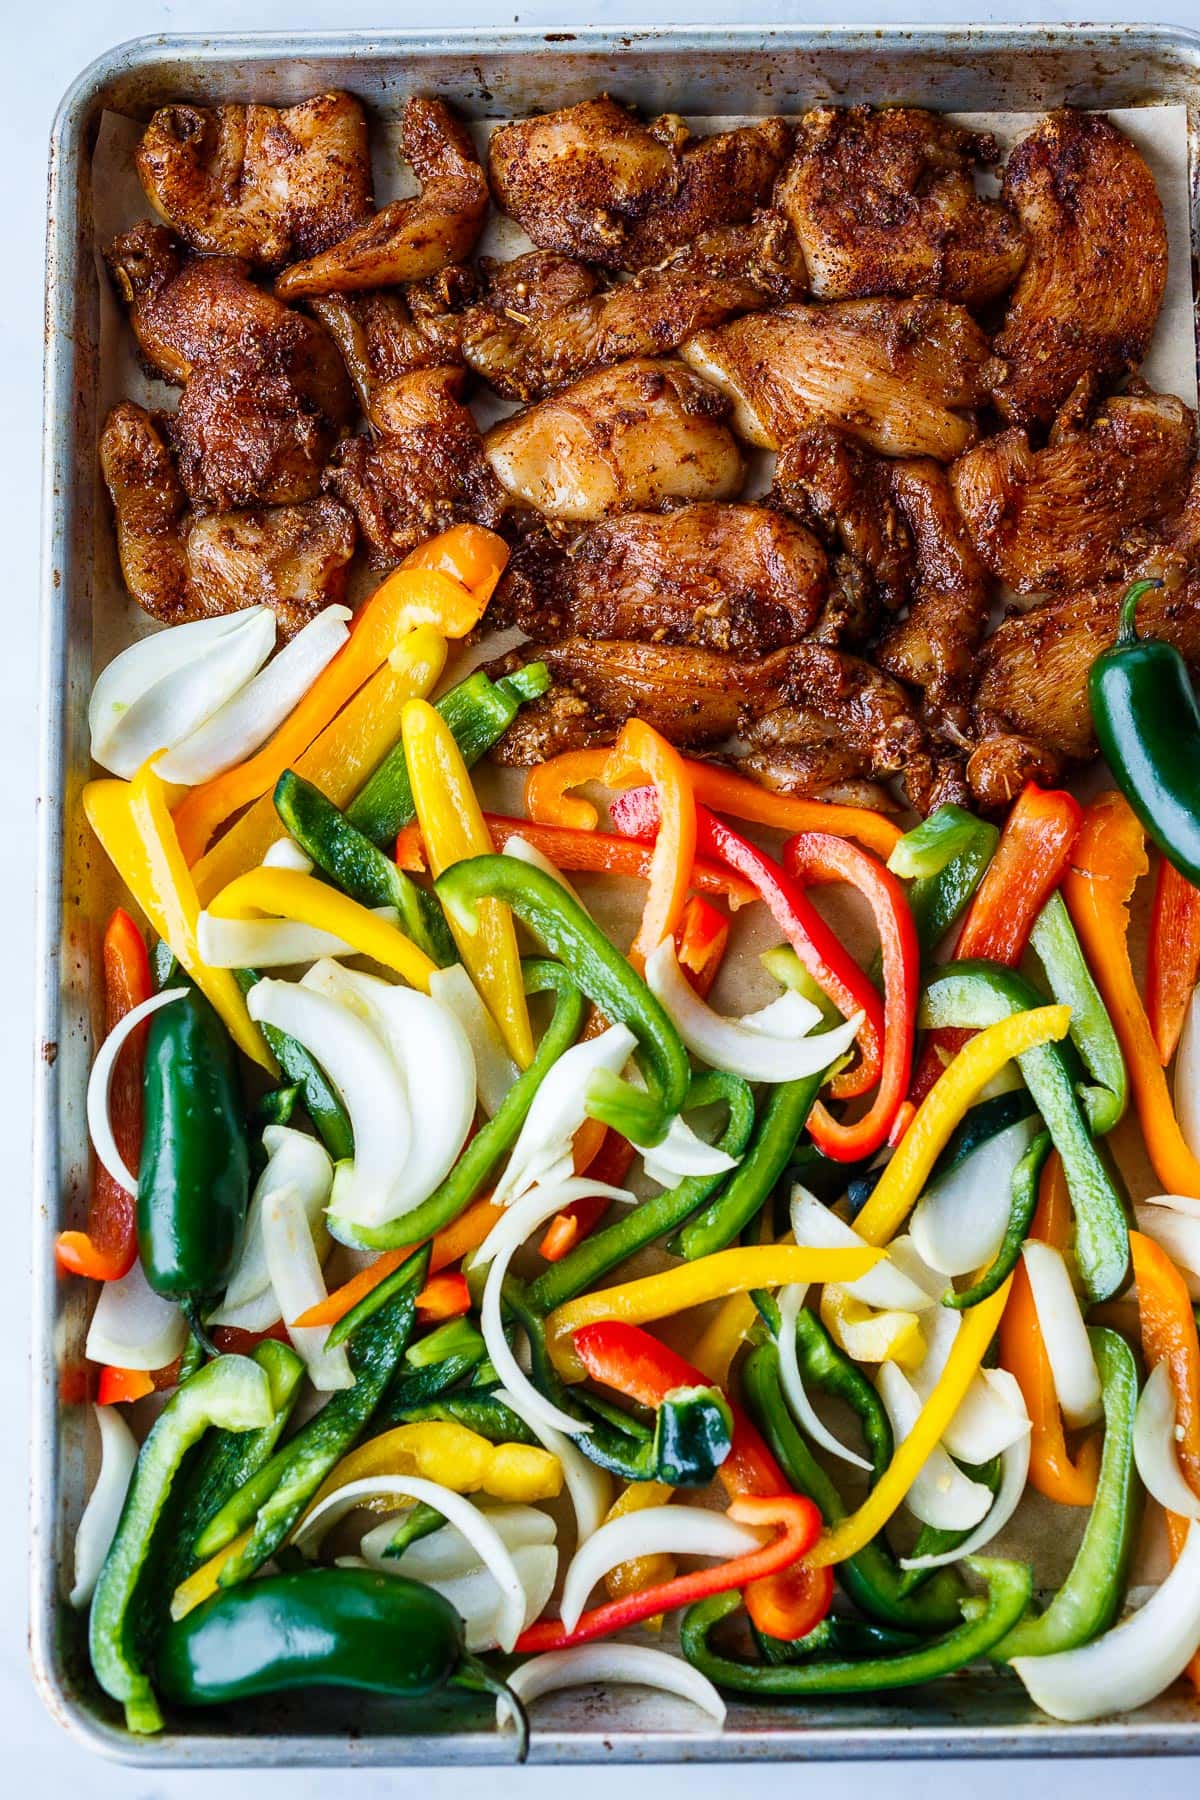 Chicken and peppers on a baking sheet.